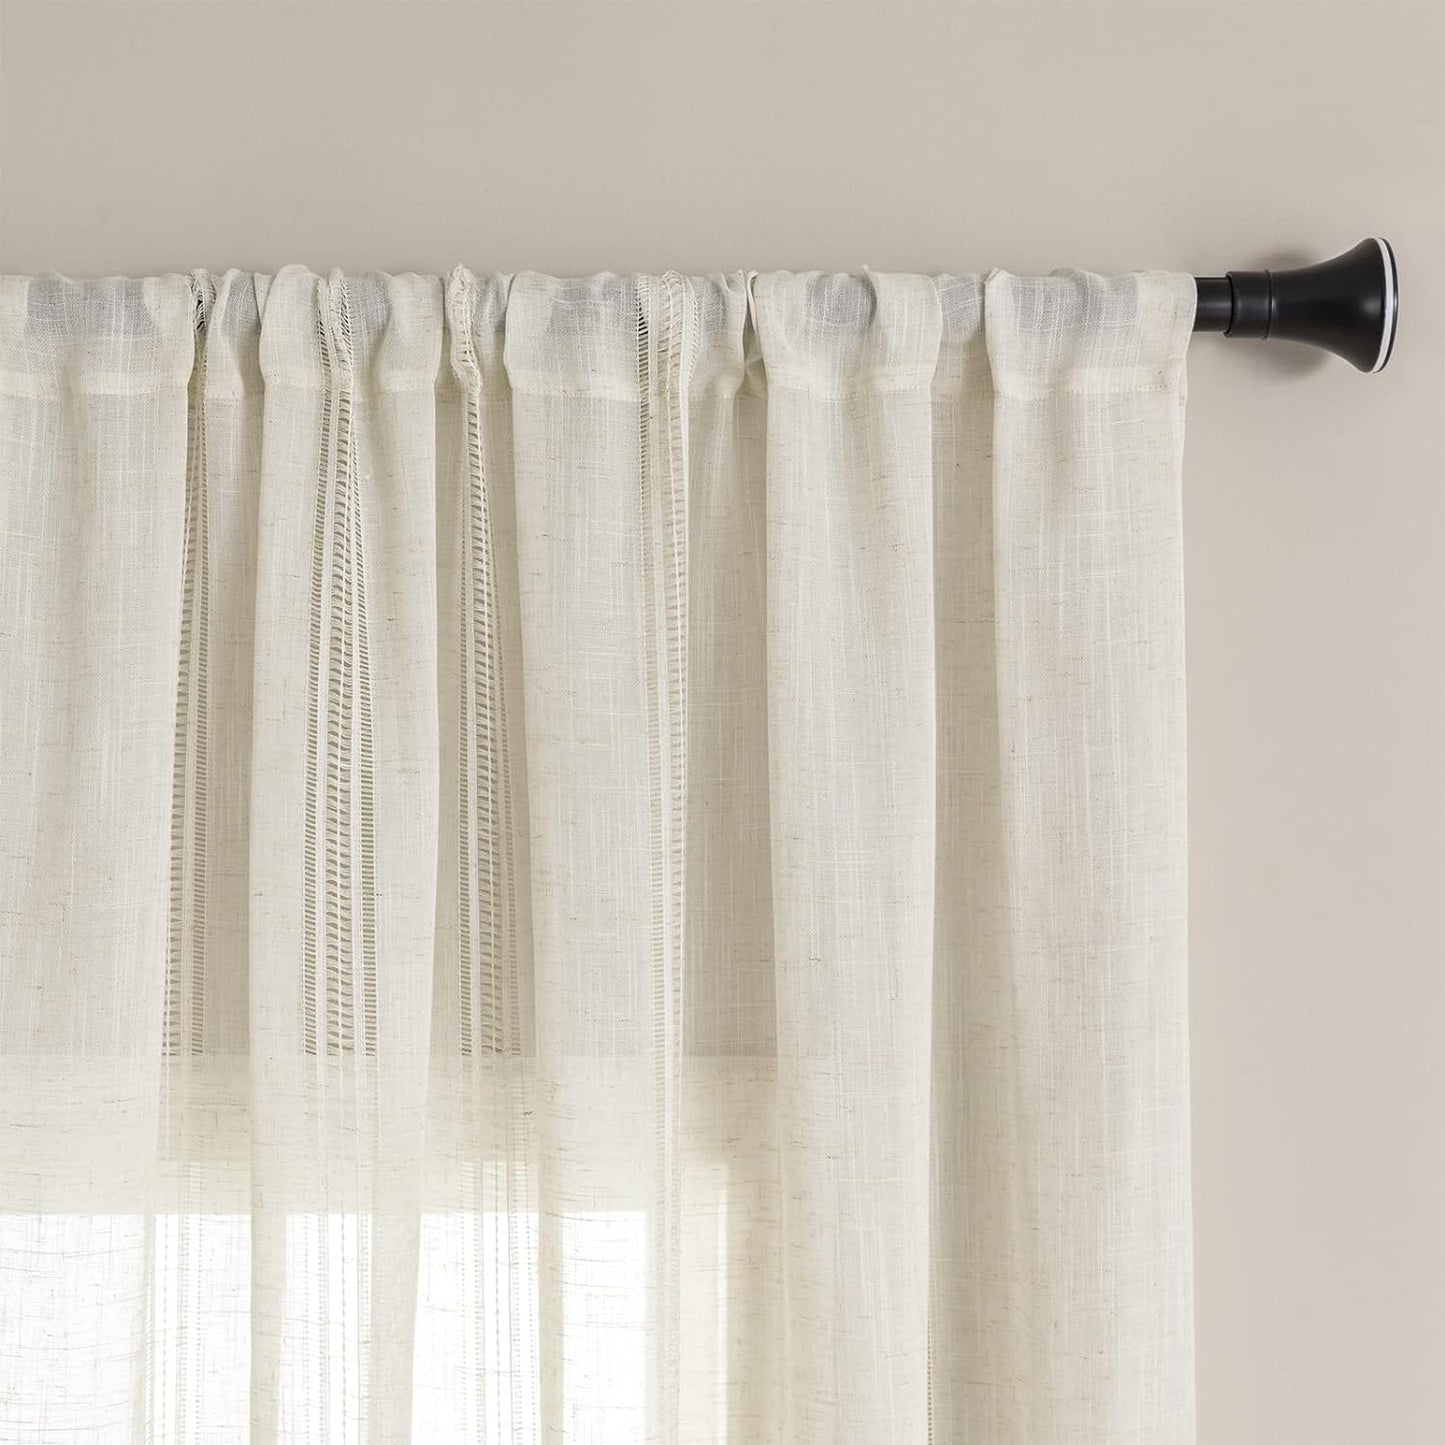 Maison Colette Linen Sheer Curtain 84 Inches Length, Rod Pocket Semi Sheer Privacy Light Filtering Window Treamtment for Bedroom/Living Room, 2 Panels,52" Width,Natural  Maison Colette Home   